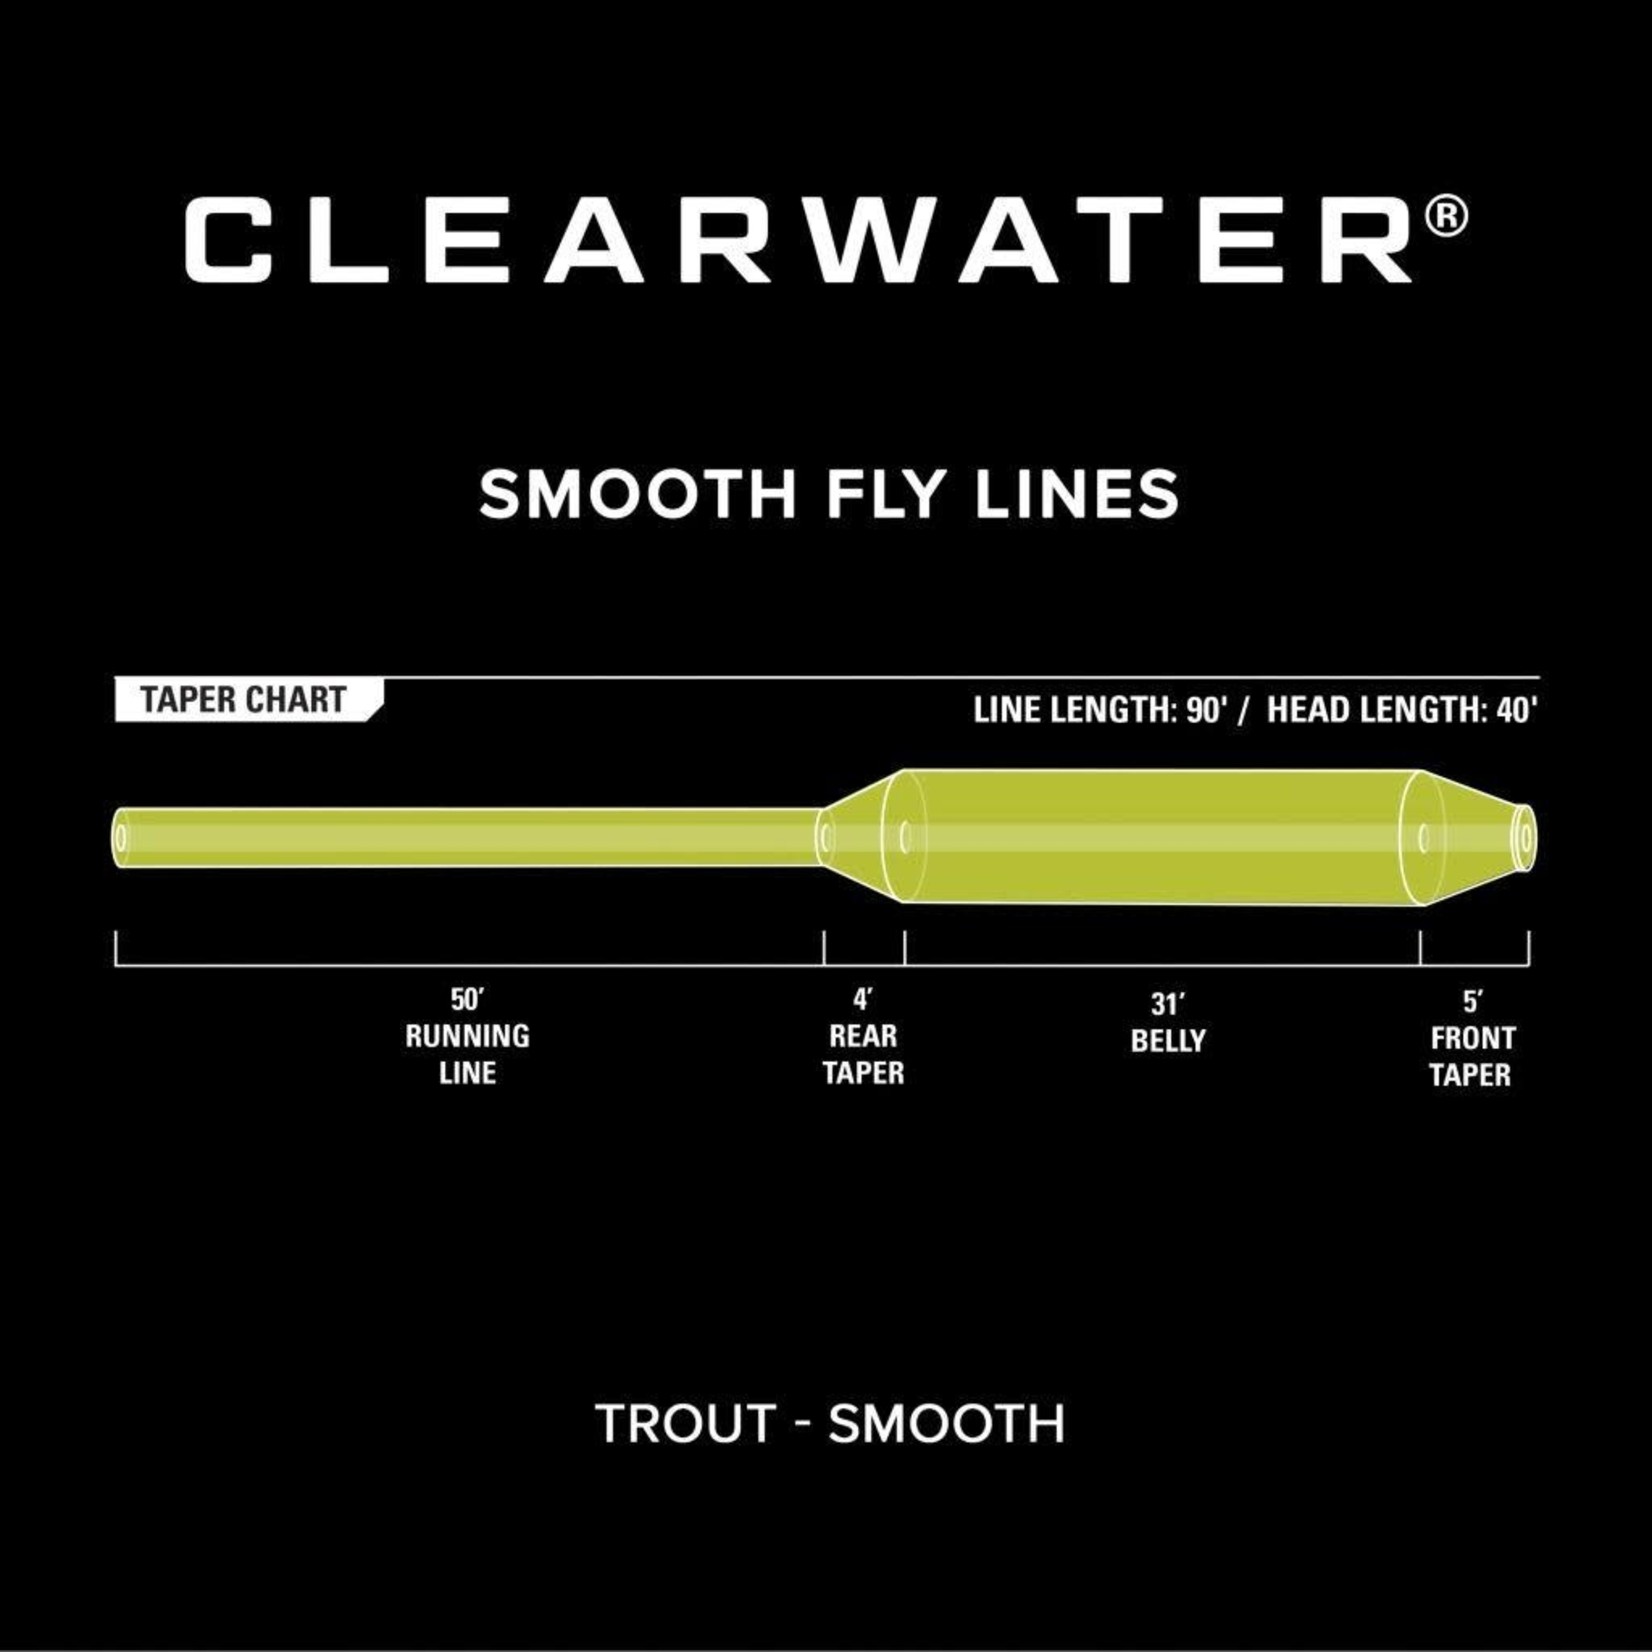 ORVIS Orvis Clearwater Fly Line